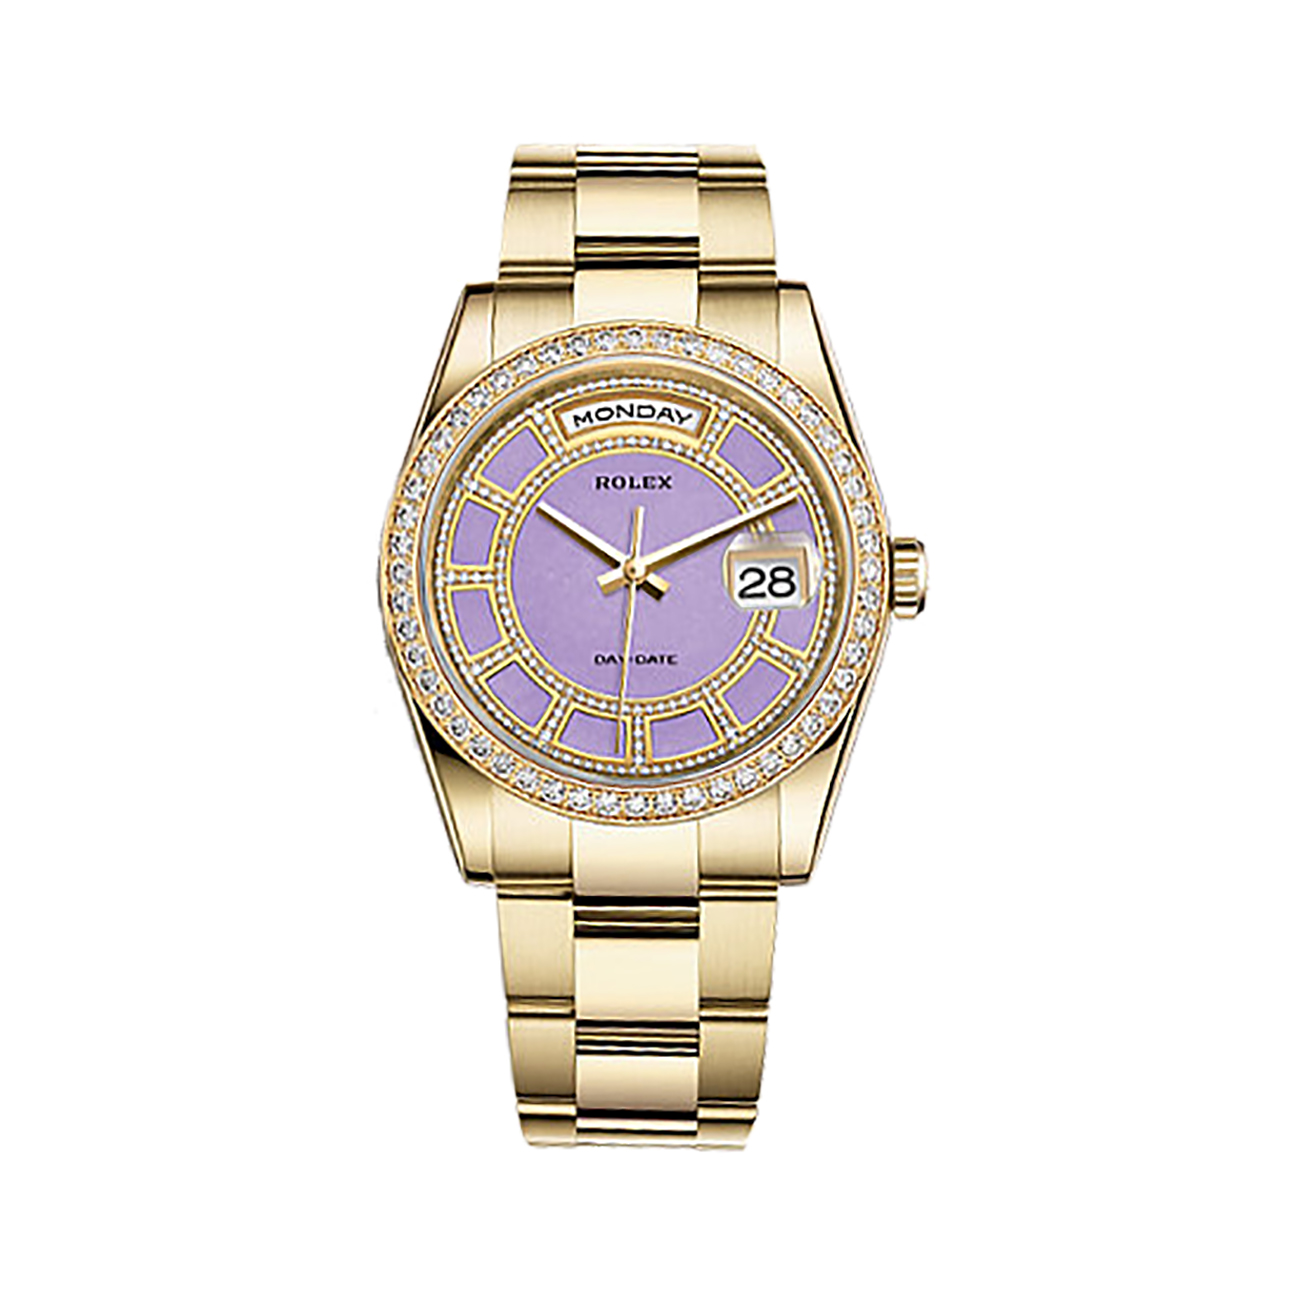 Day-Date 36 118348 Gold & Diamonds Watch (Carousel of Lavender Jade)